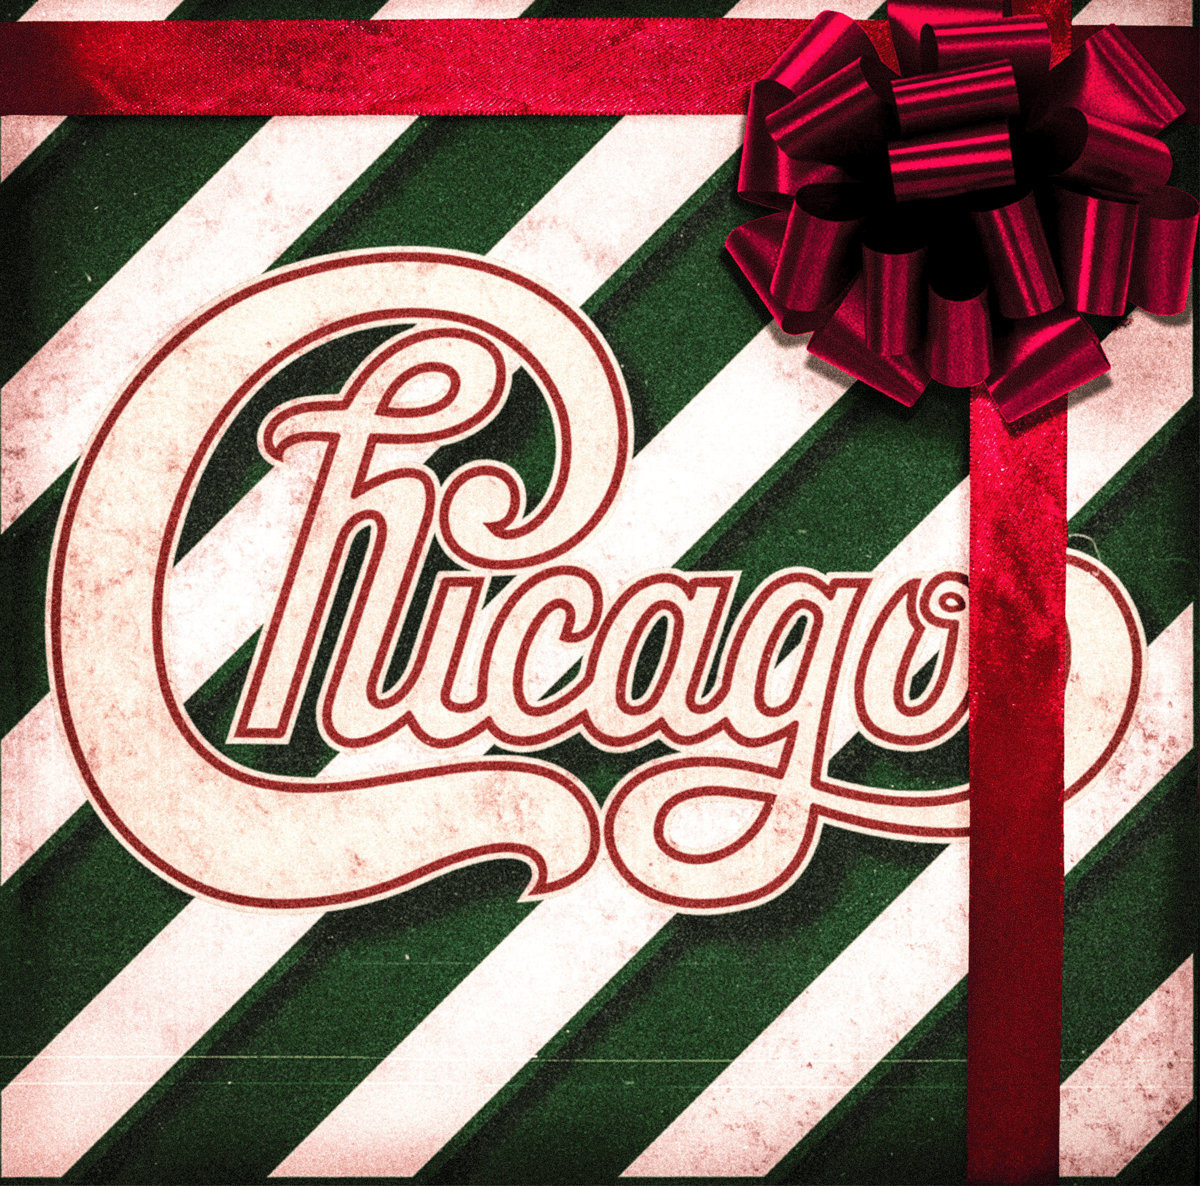 Chicago Christmas Available October 11th From Rhino Chicago